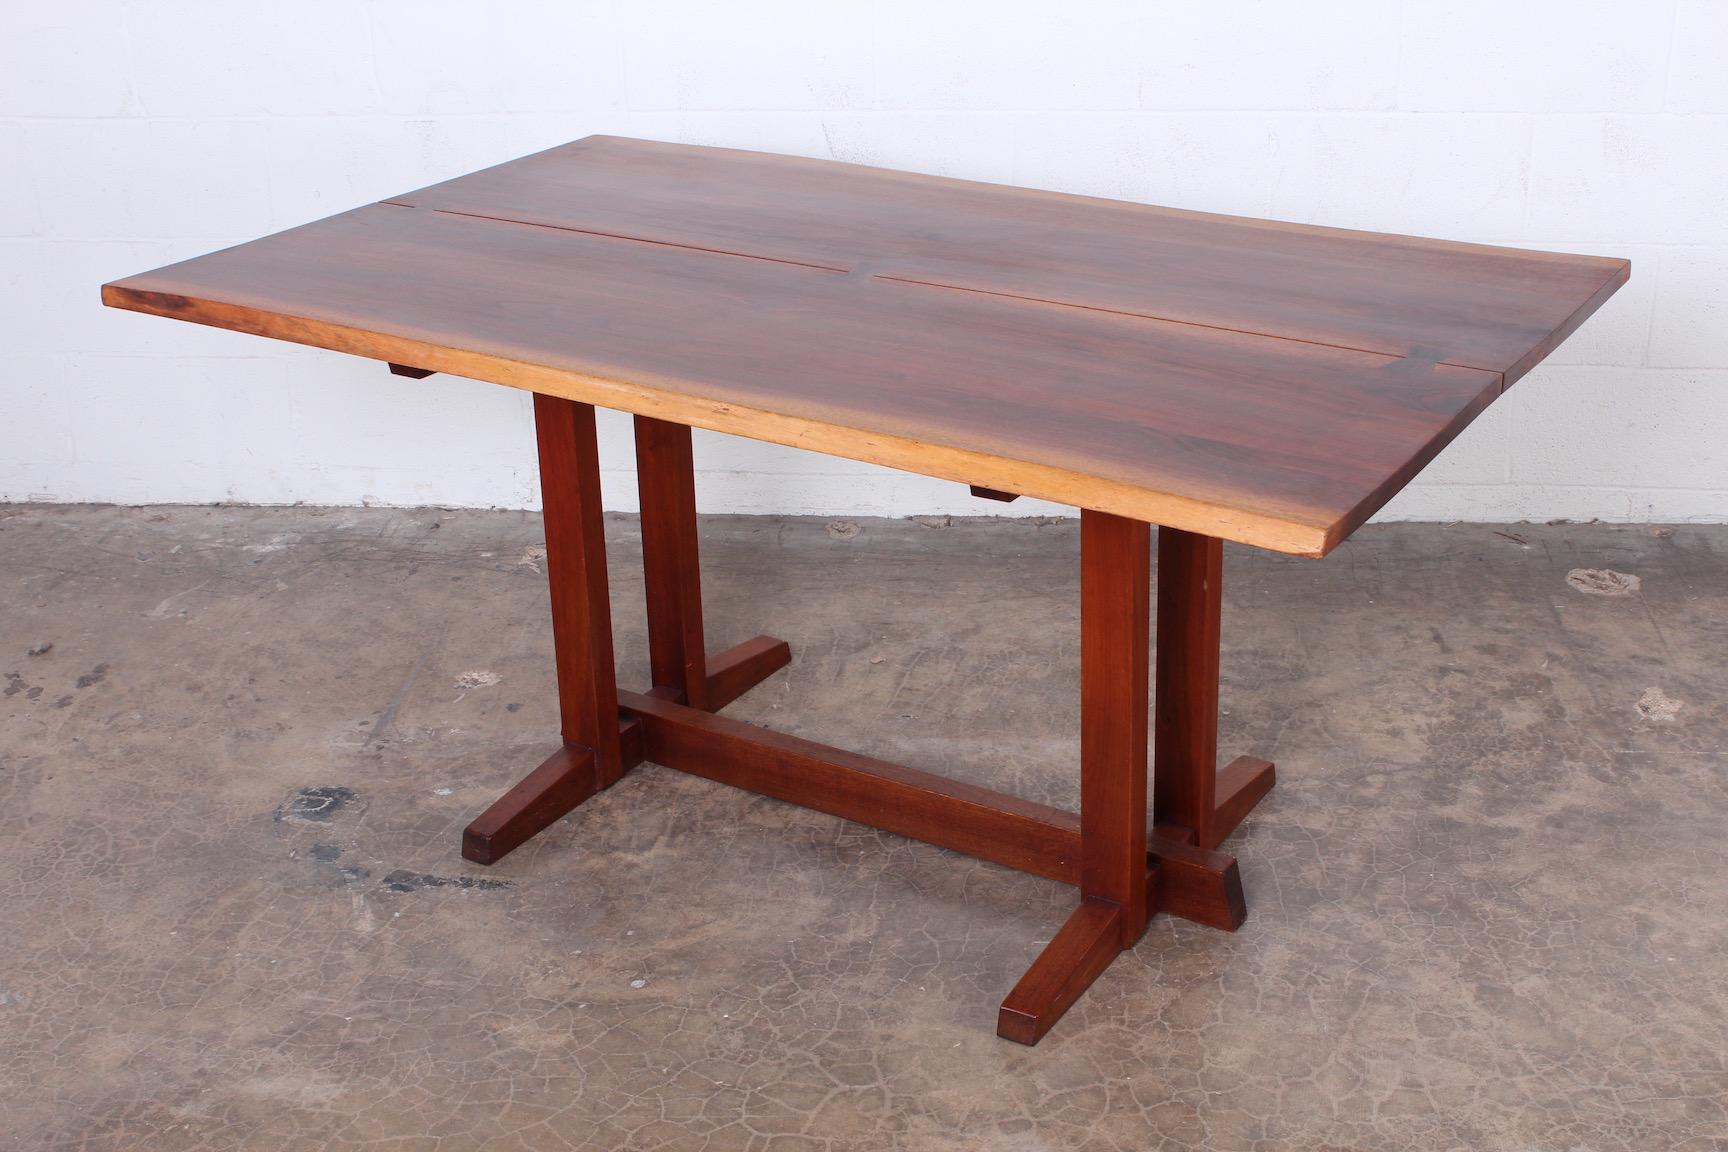 A beautiful sap-grained black walnut top with three rosewood butterfly joints. Sold with paperwork from Nakashima.